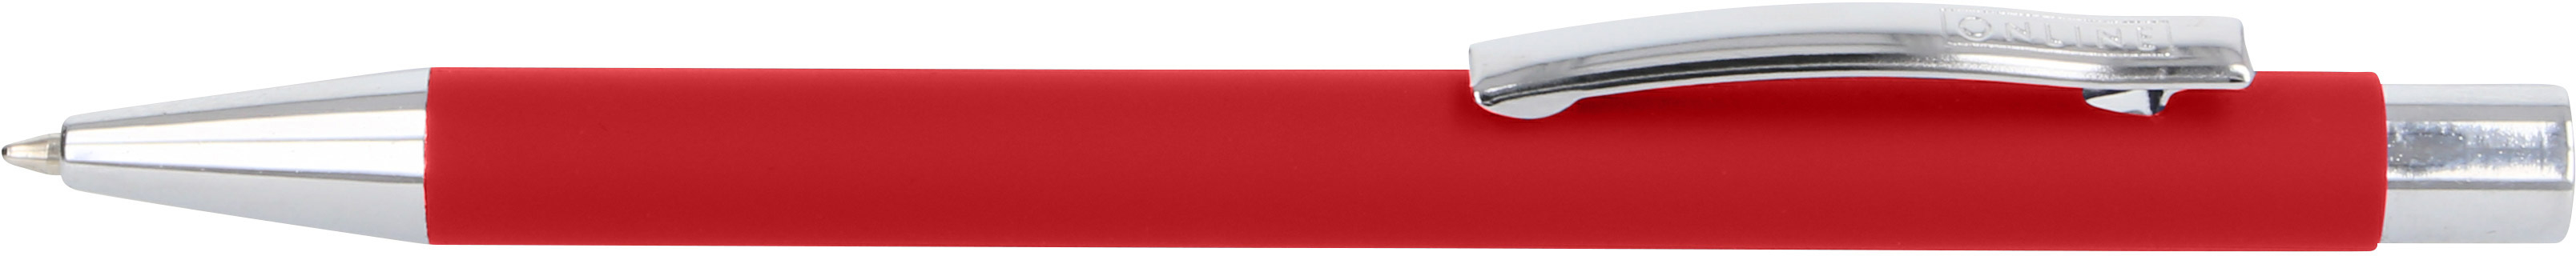 ONLINE Stylo à bille Soft Metal 21738/3D Classic Red Classic Red